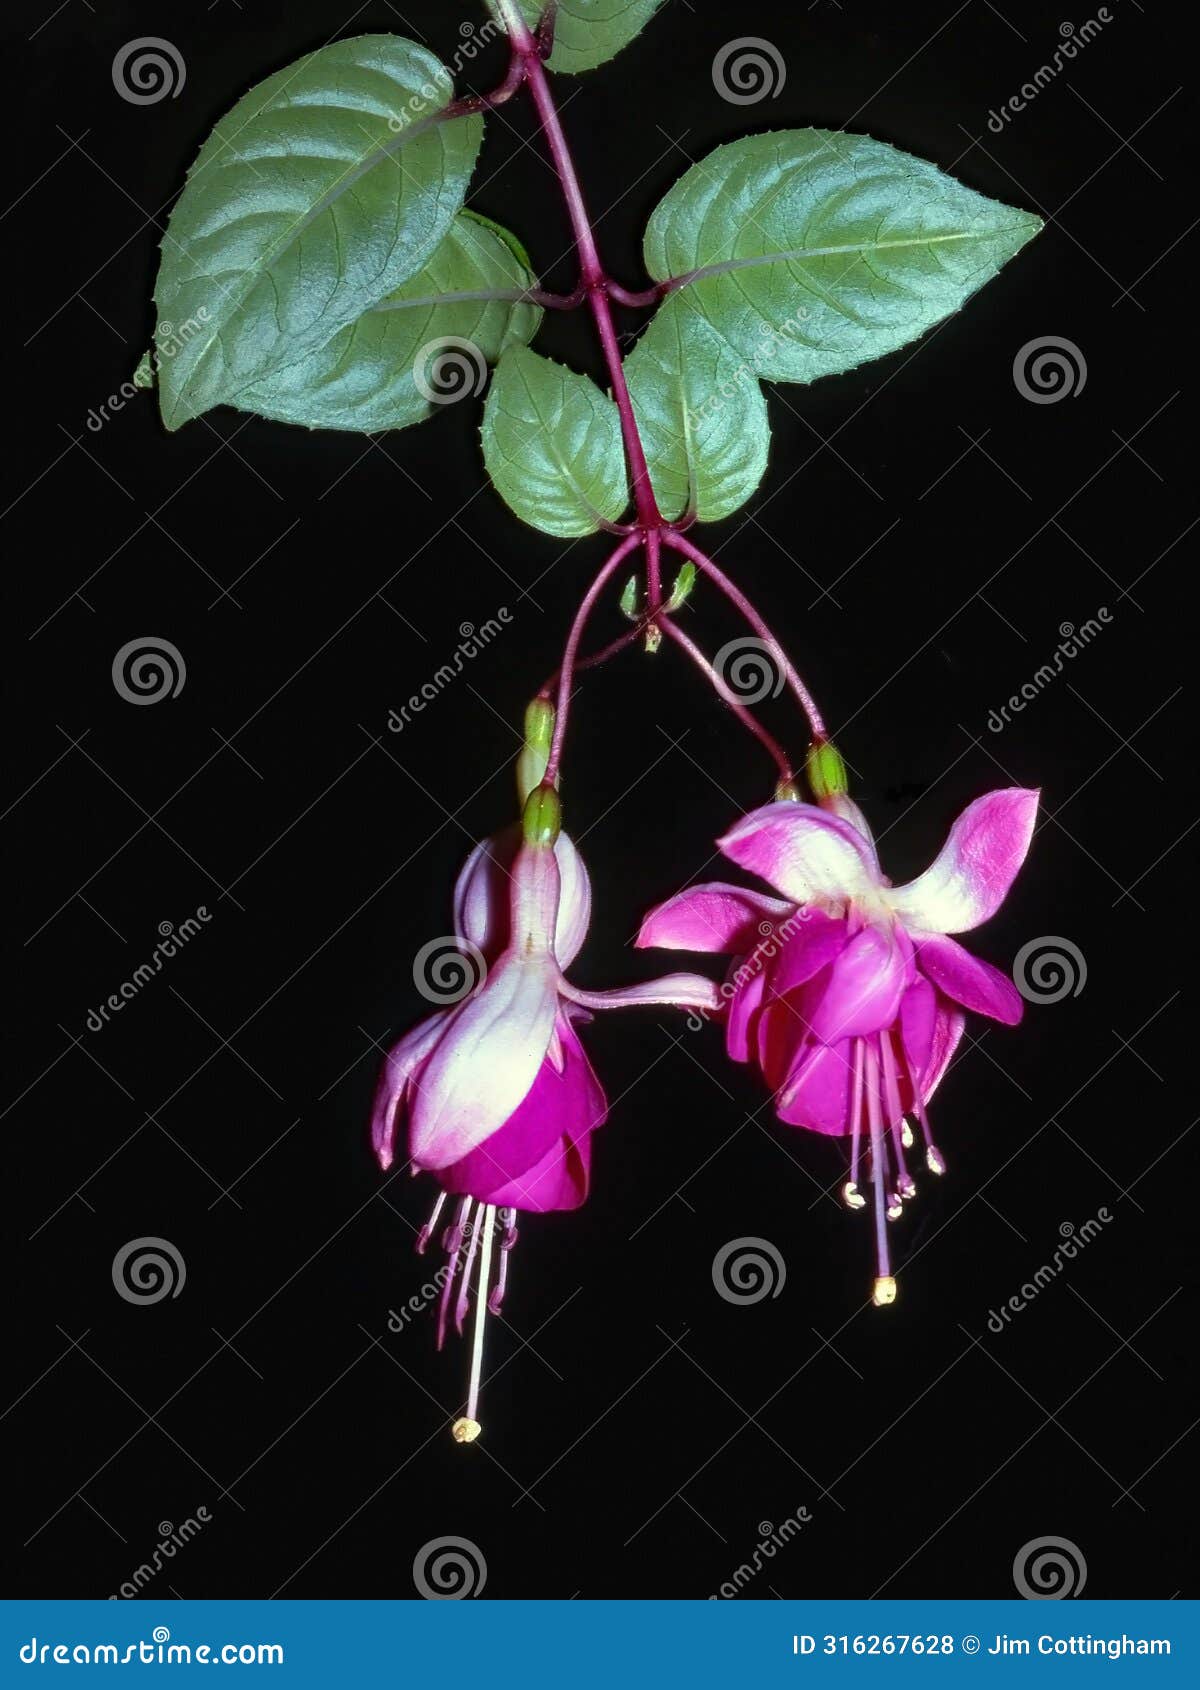 hanging fuchsia blooms - against black background